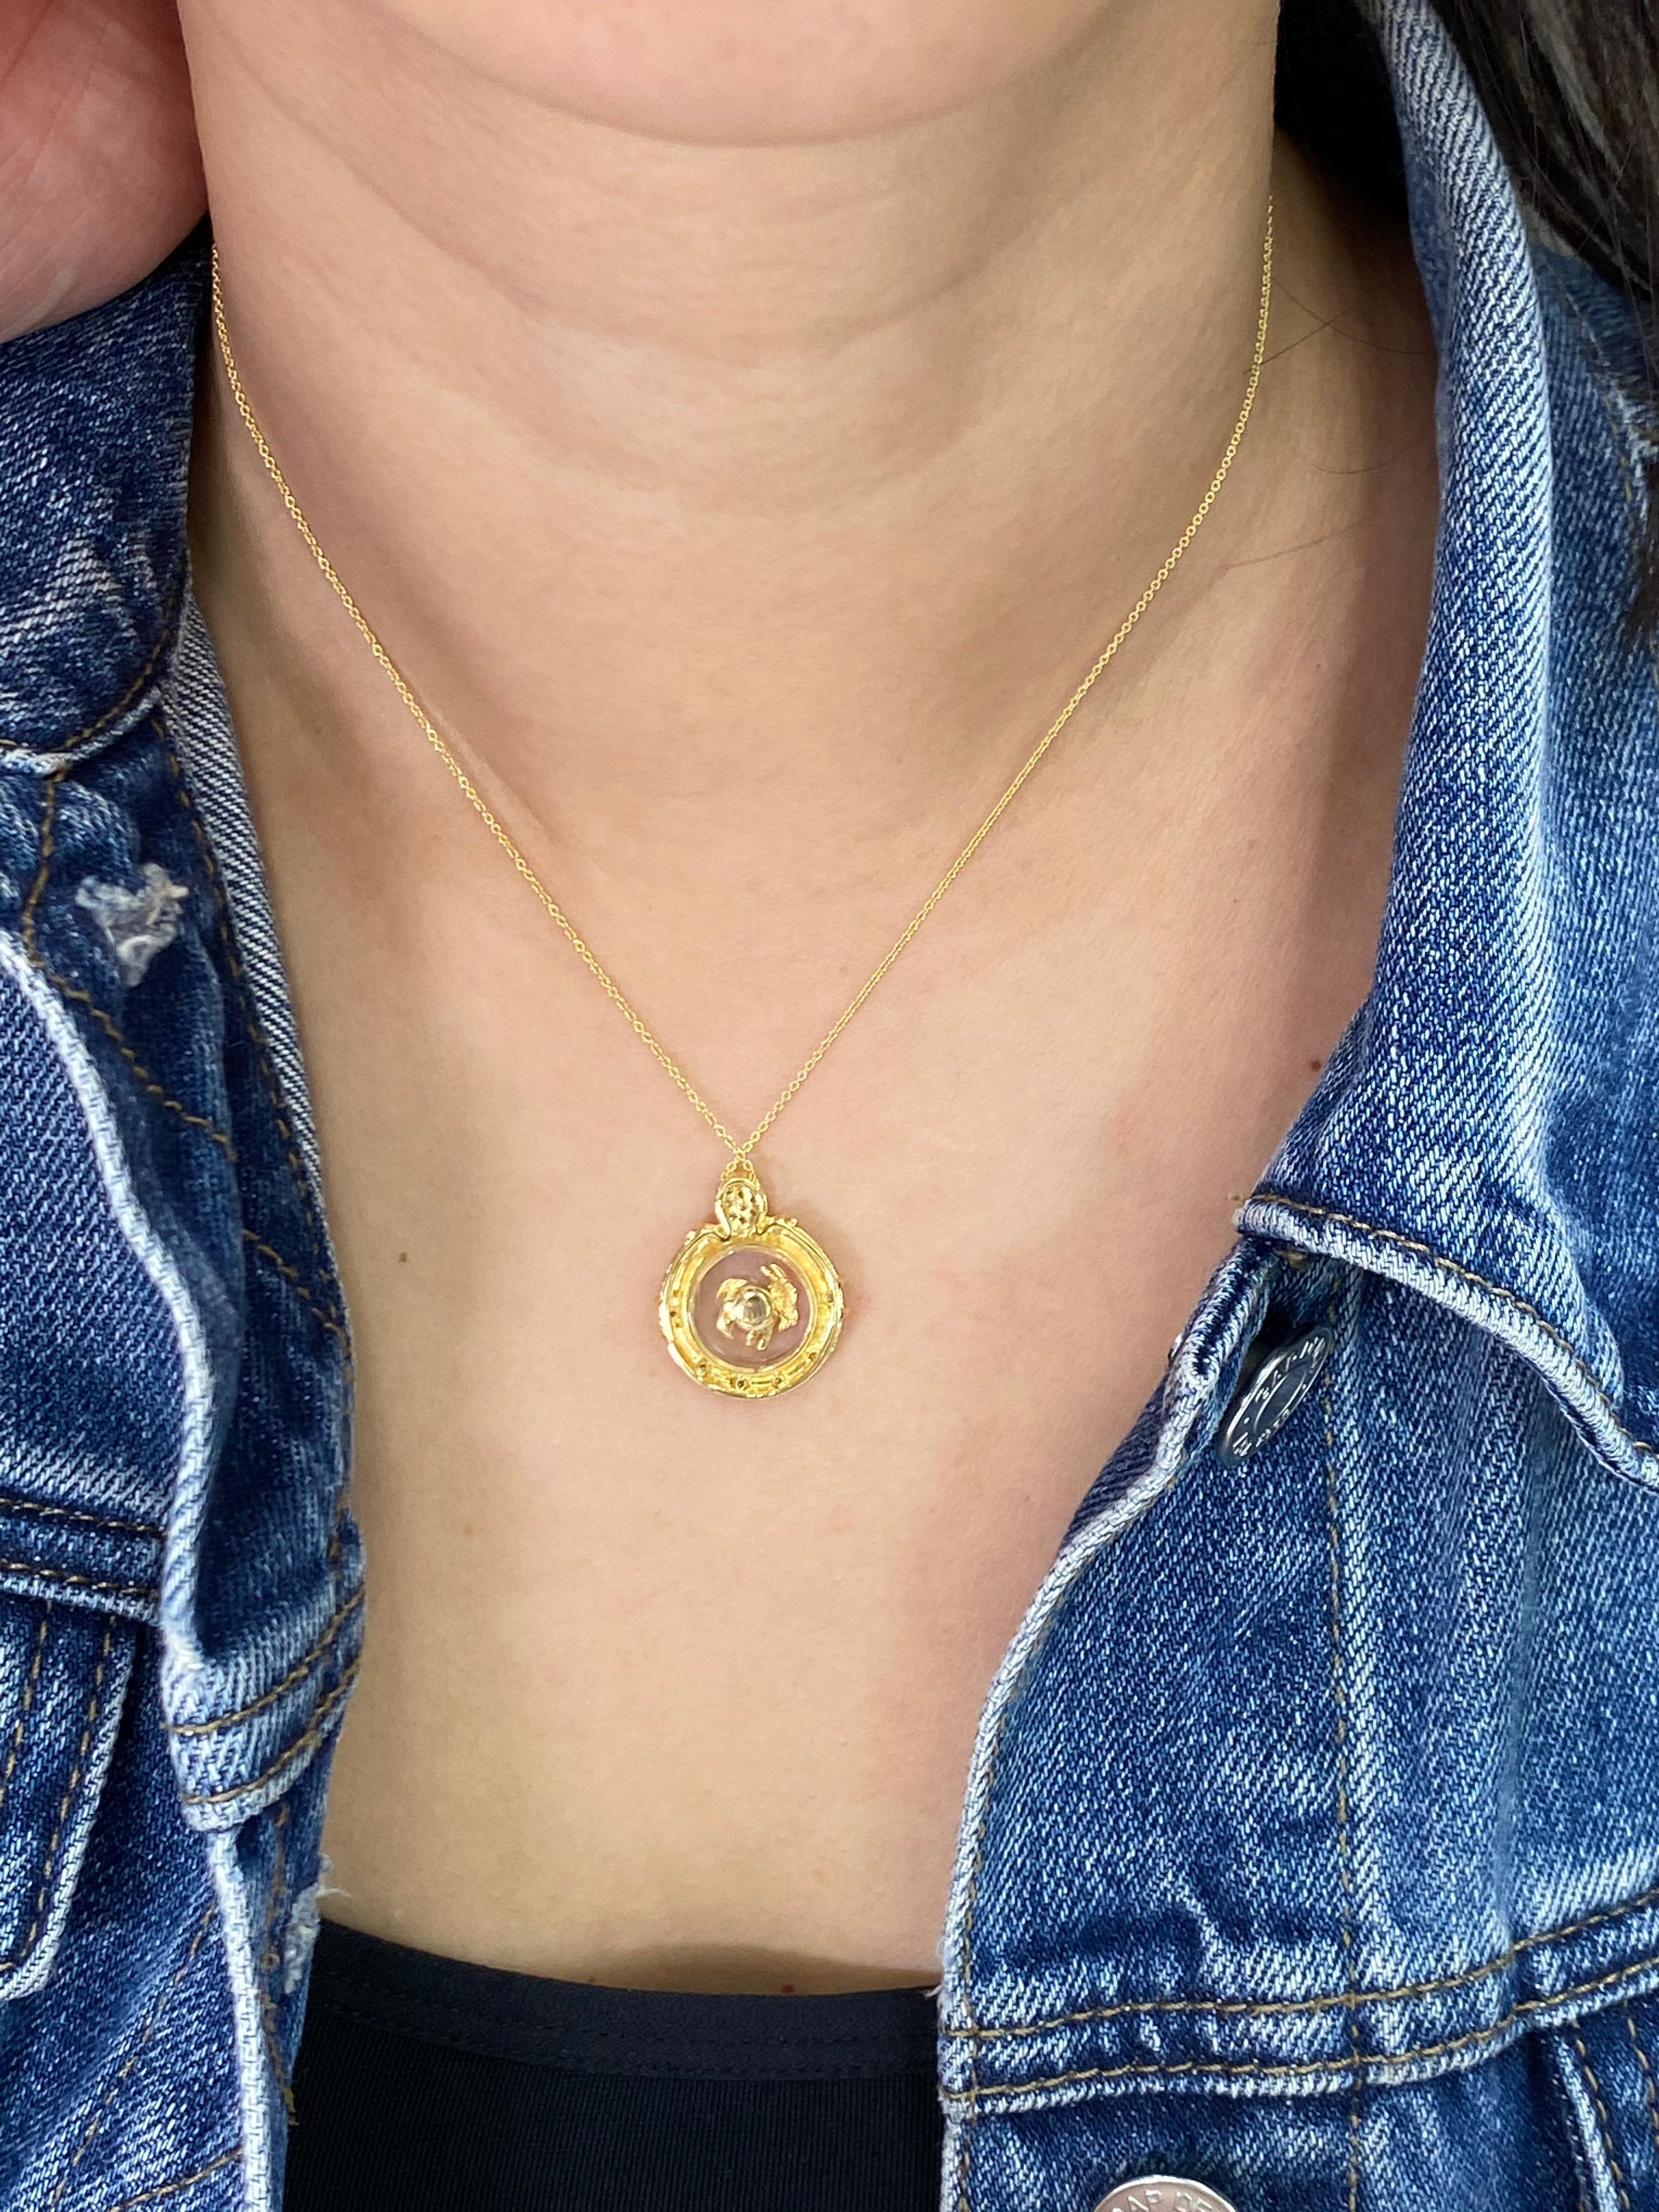 Here is a unique pendant that you don't see everyday! In the chinese zodiac, the sheep or goat is the eighth in the 12 year cycle. The pendant is set in 18k yellow gold with approximately 0.15cts of white diamonds. The center goat or sheep moves and